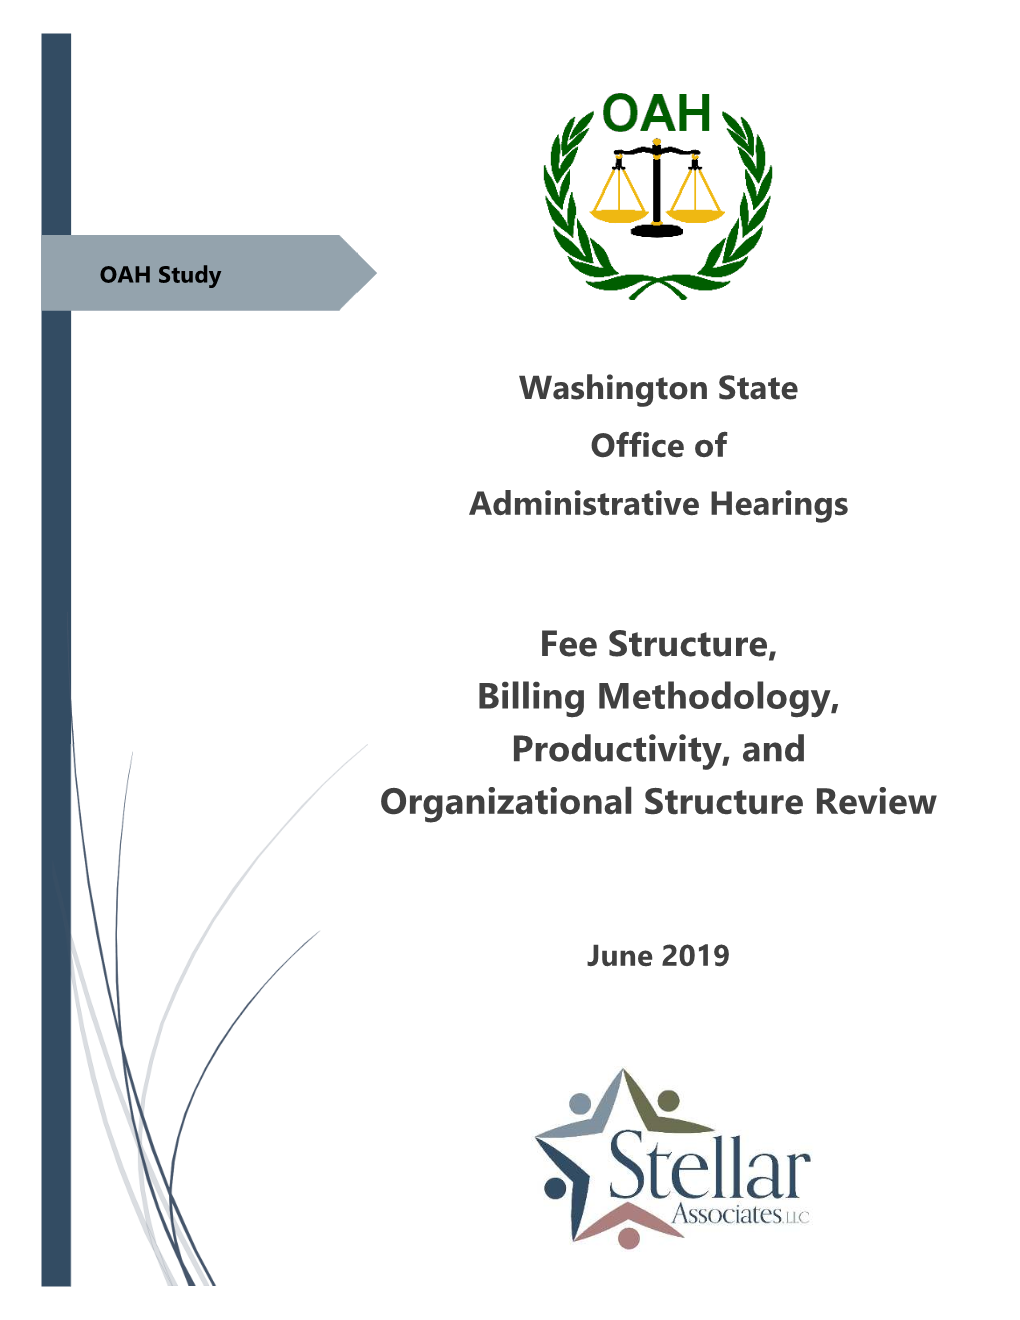 Fee Structure, Billing Methodology, Productivity, and Organizational Structure Review